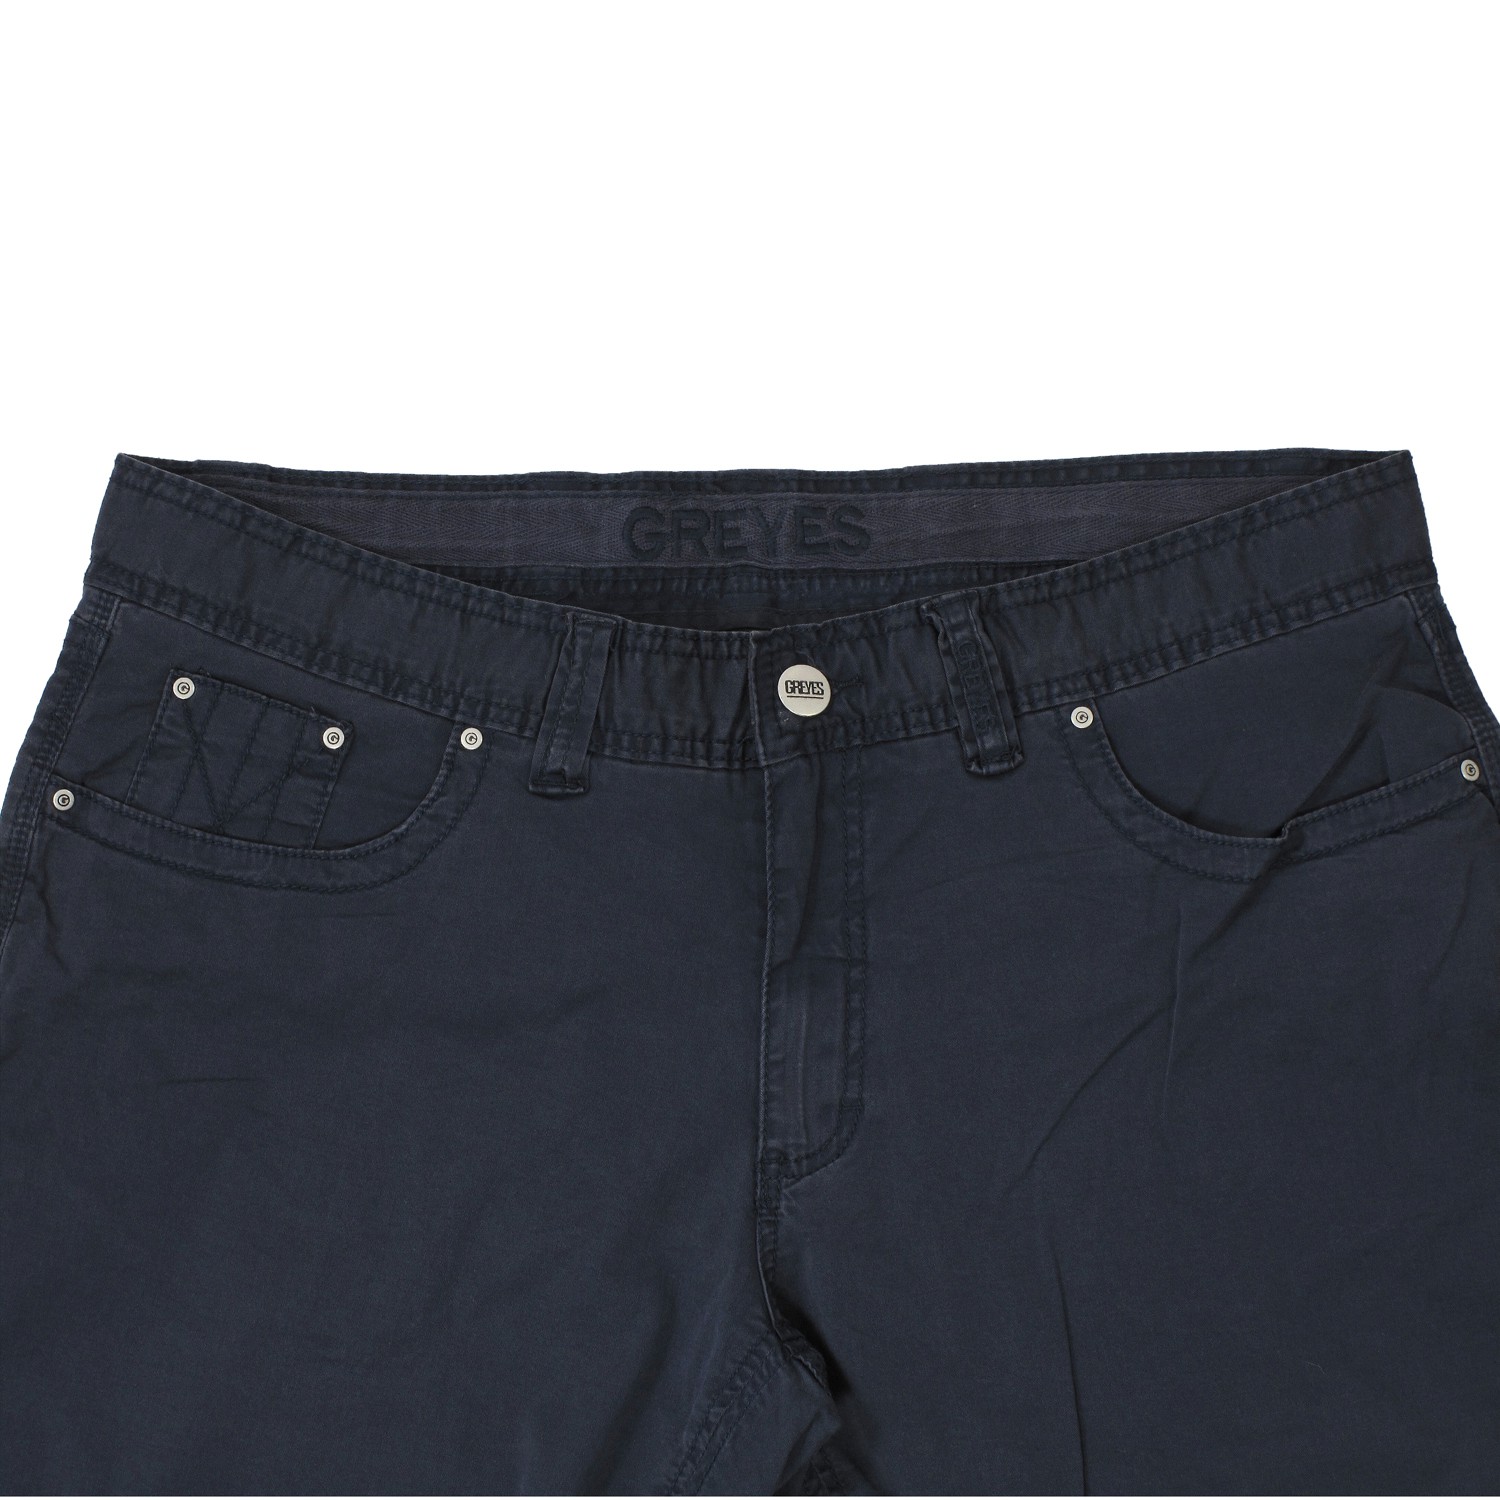 Dark blue five-pocket-pants by Greyes in extra large sizes up to 52